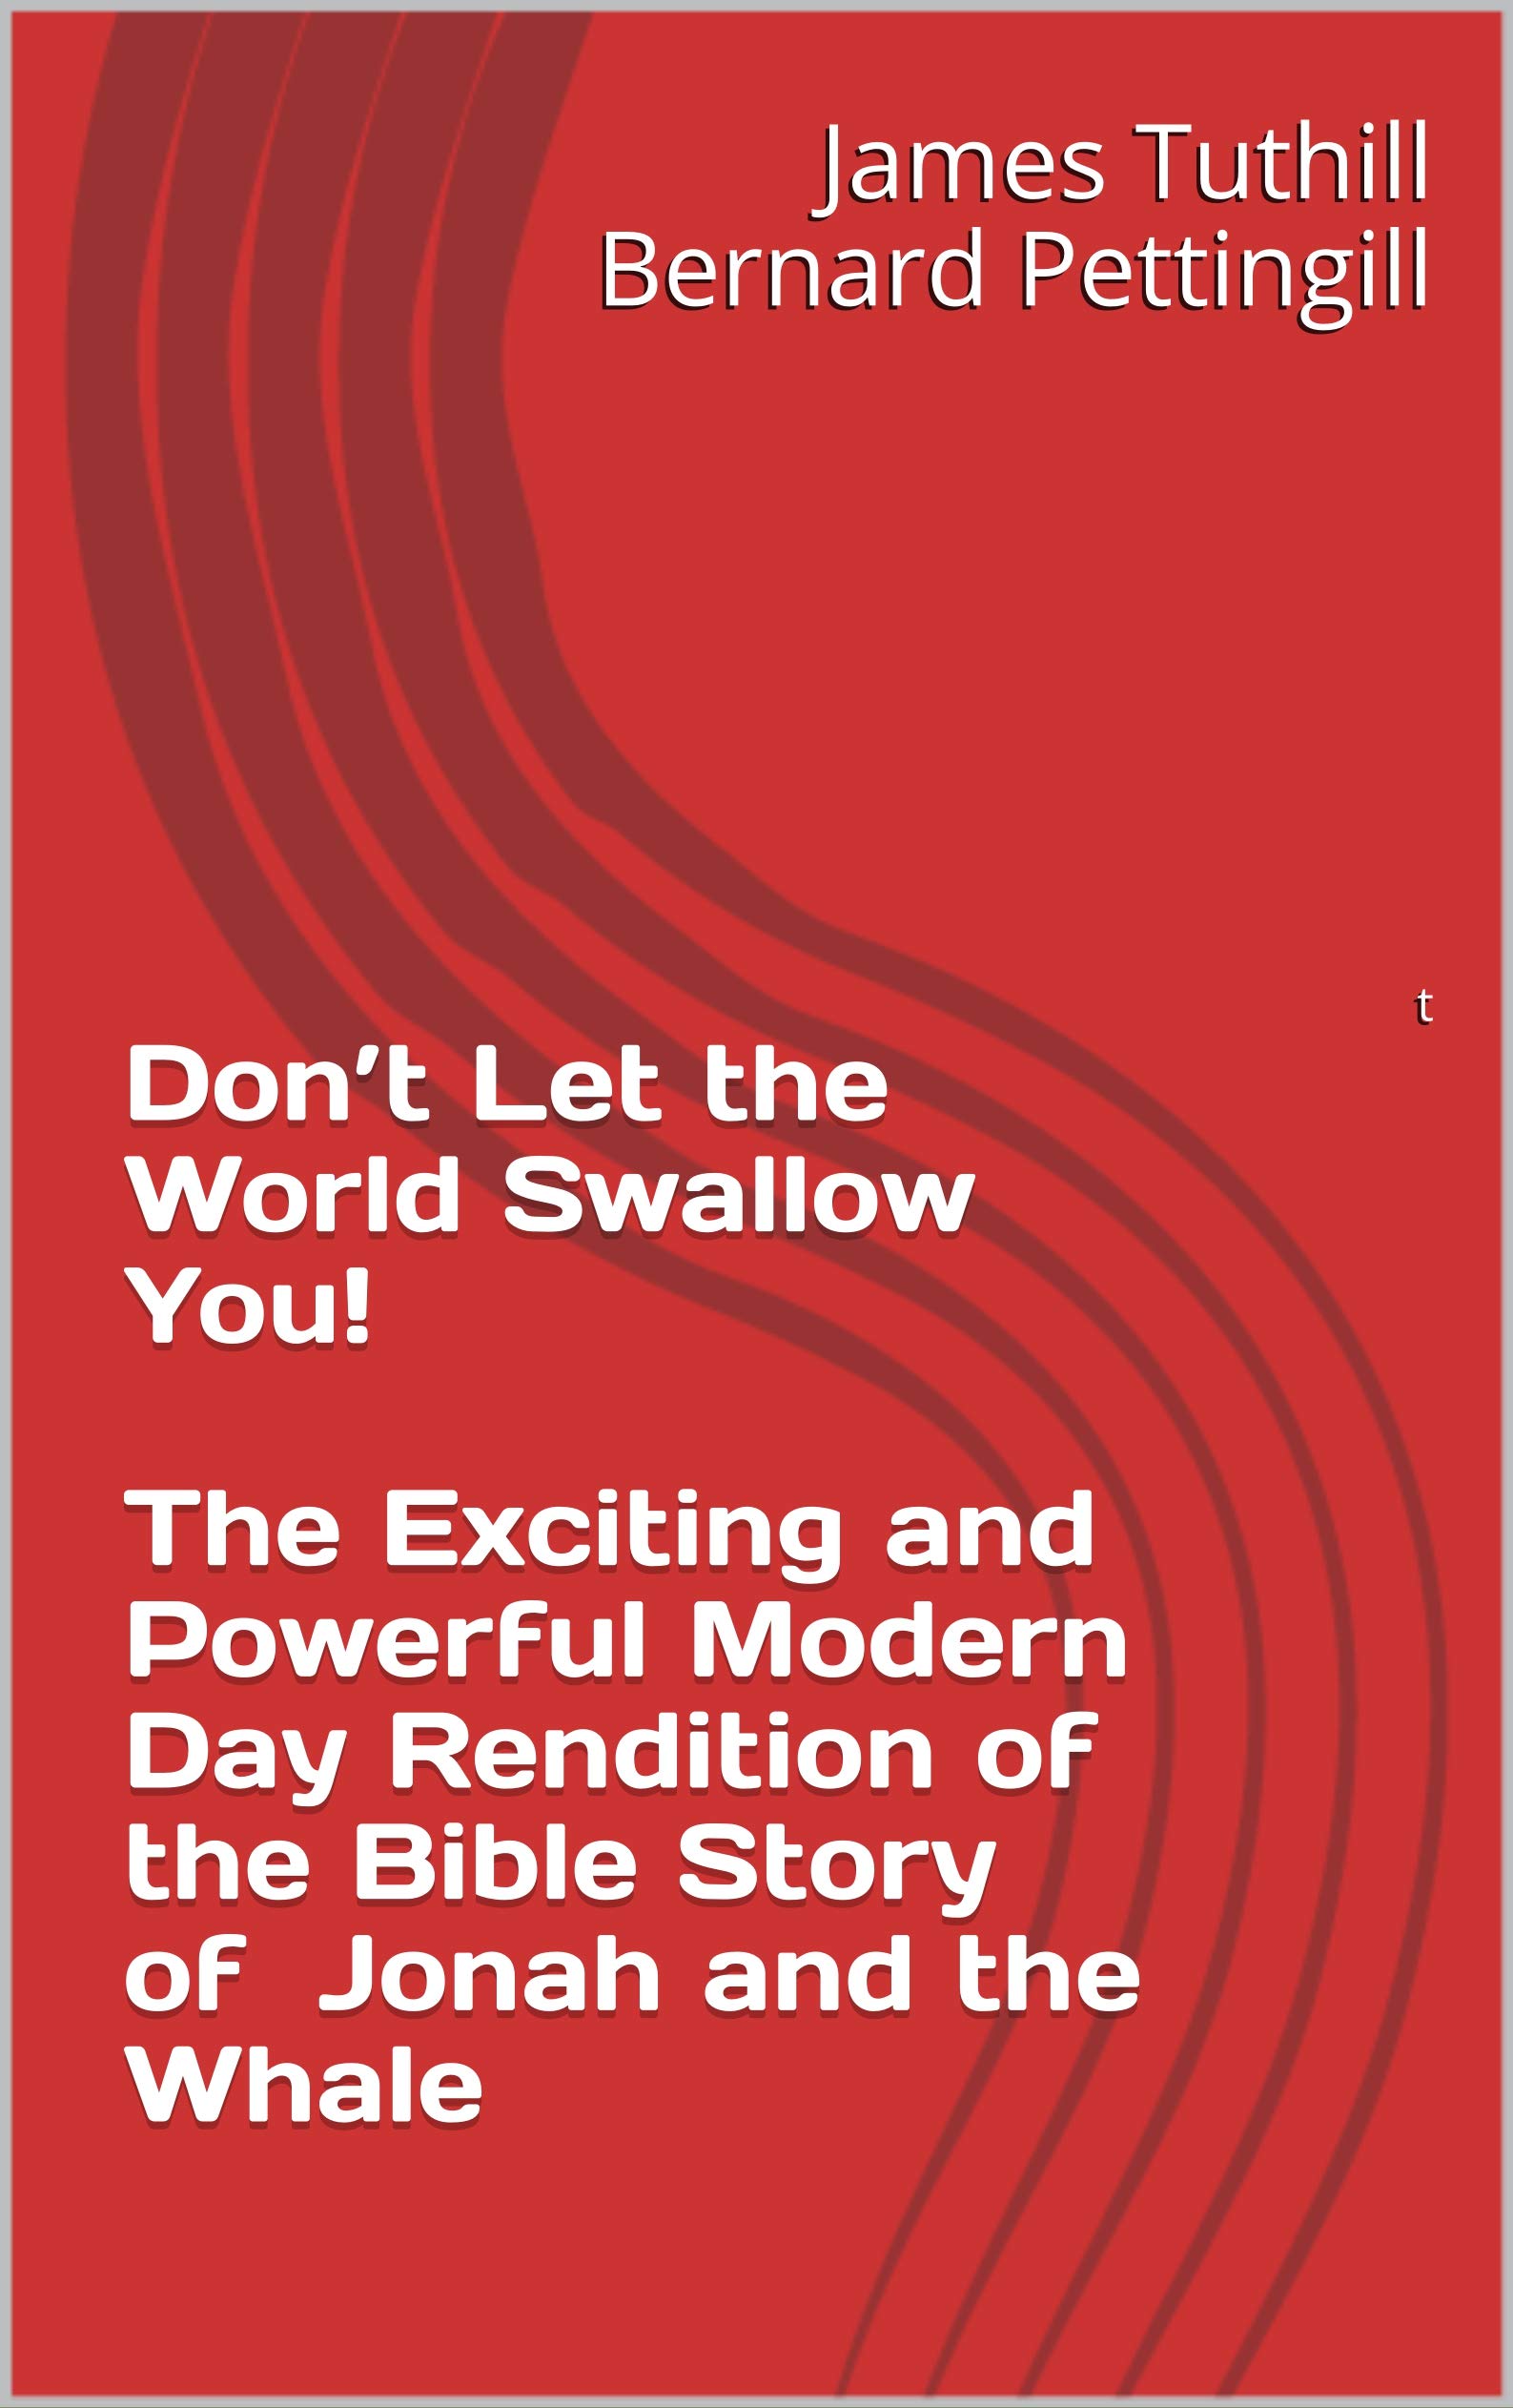 Don’t Let the World Swallow You! The Exciting and Powerful Modern Day Rendition of the Bible Story of Jonah and the Whale: First in a series of Conversations ... from the Greatest Heroes of the Bible